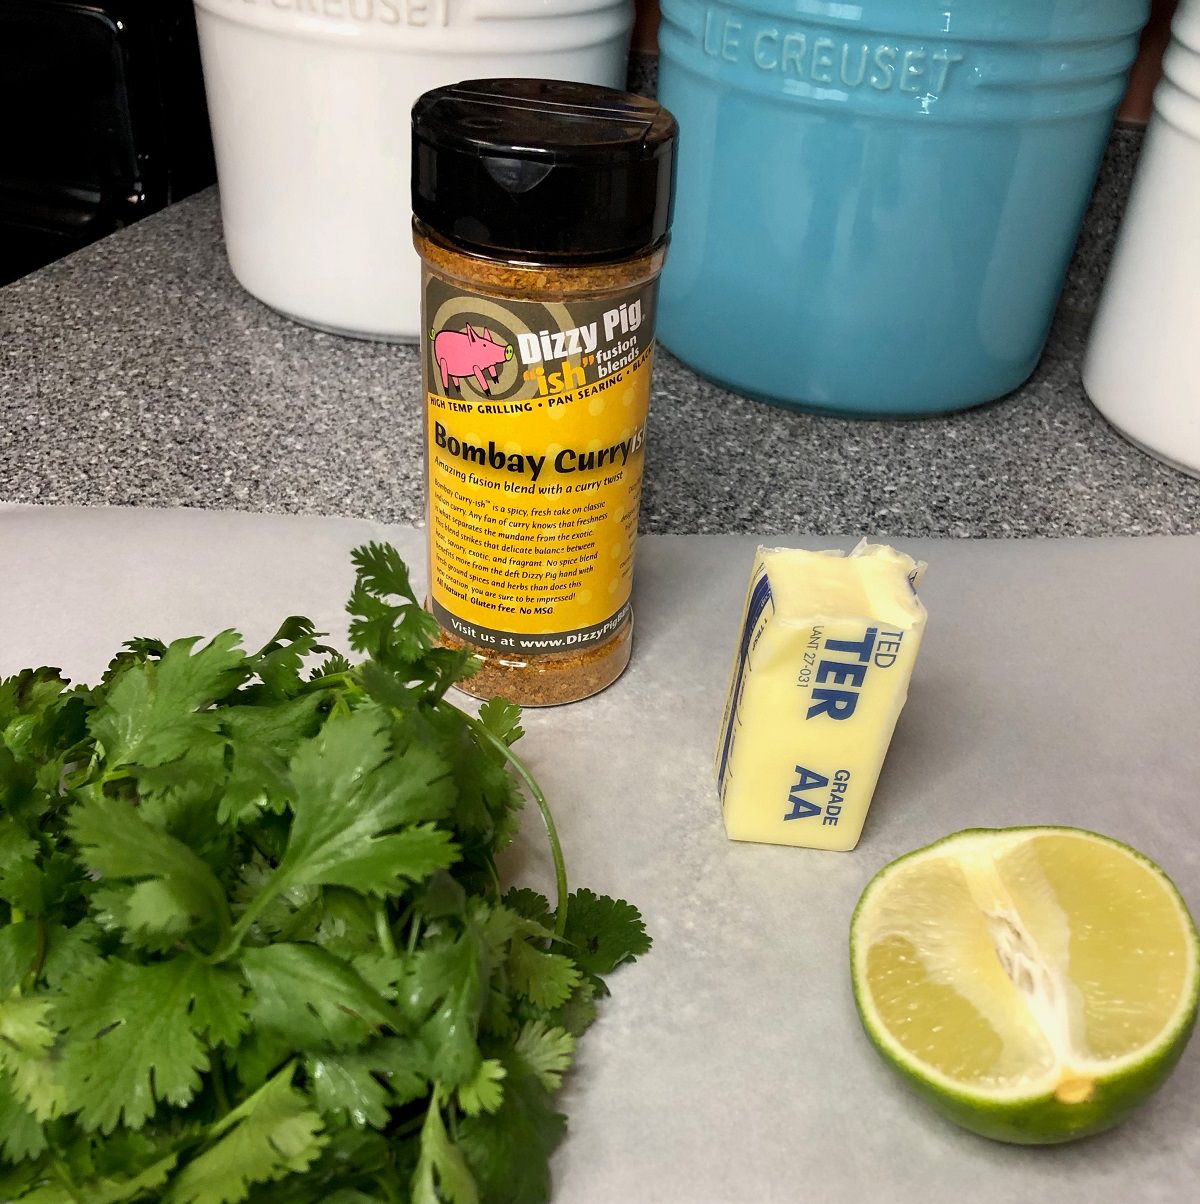 Curry-ish Lime Butter ingredients